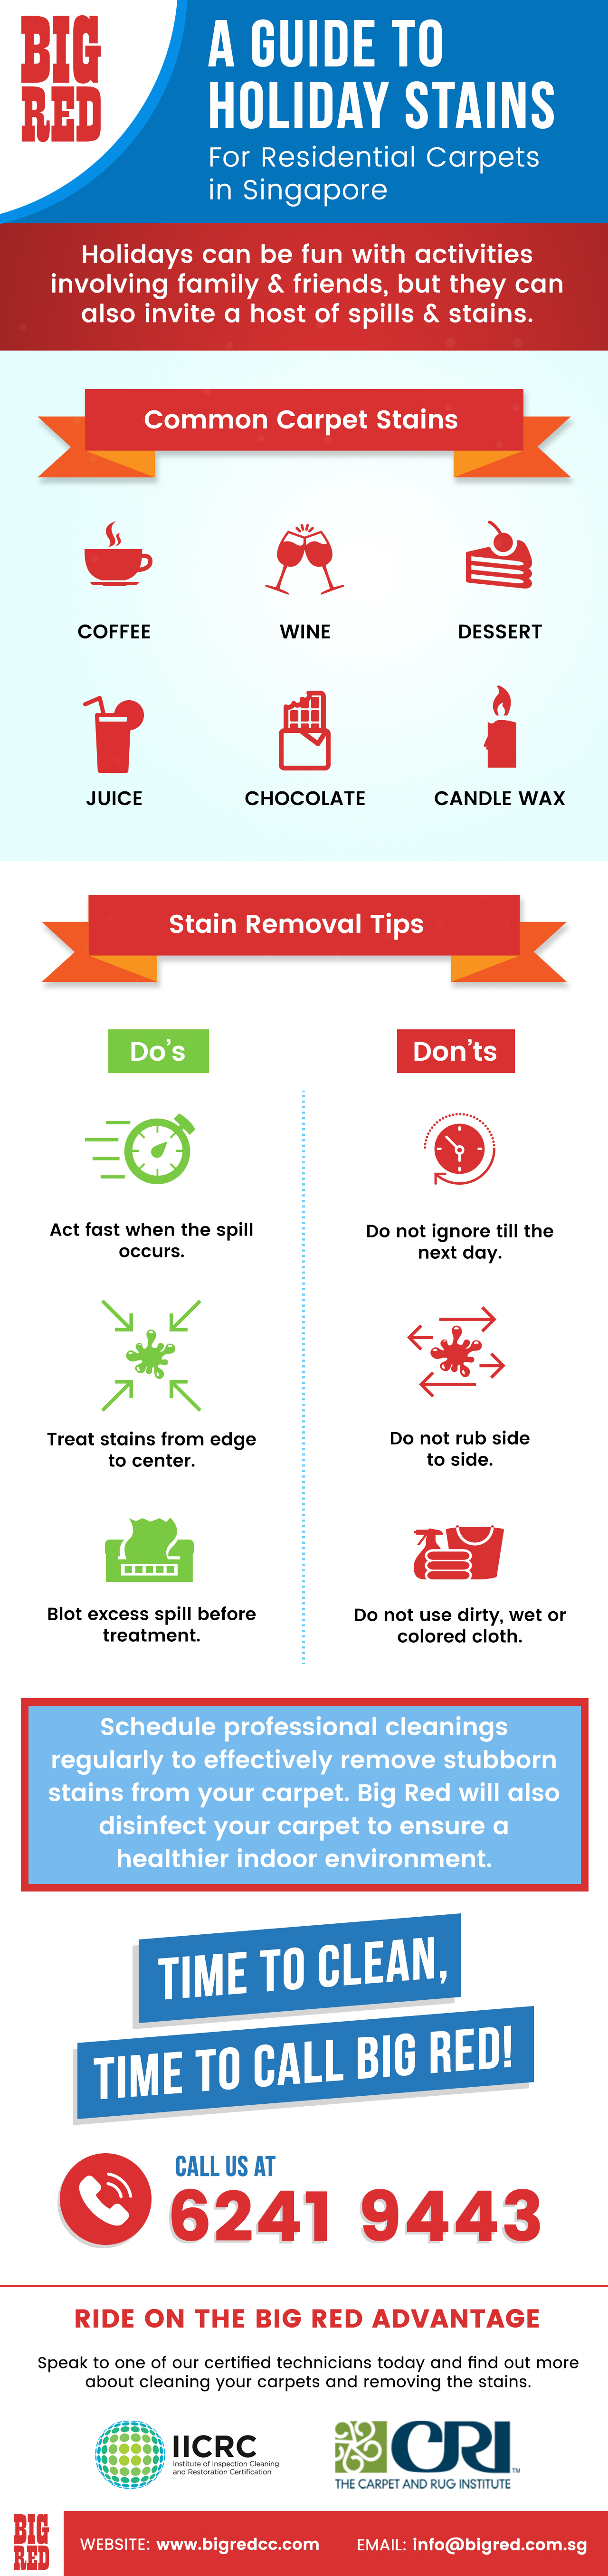 A Guide to Holiday Stains - Infographic - Big Red Carpet Cleaners, Singapore